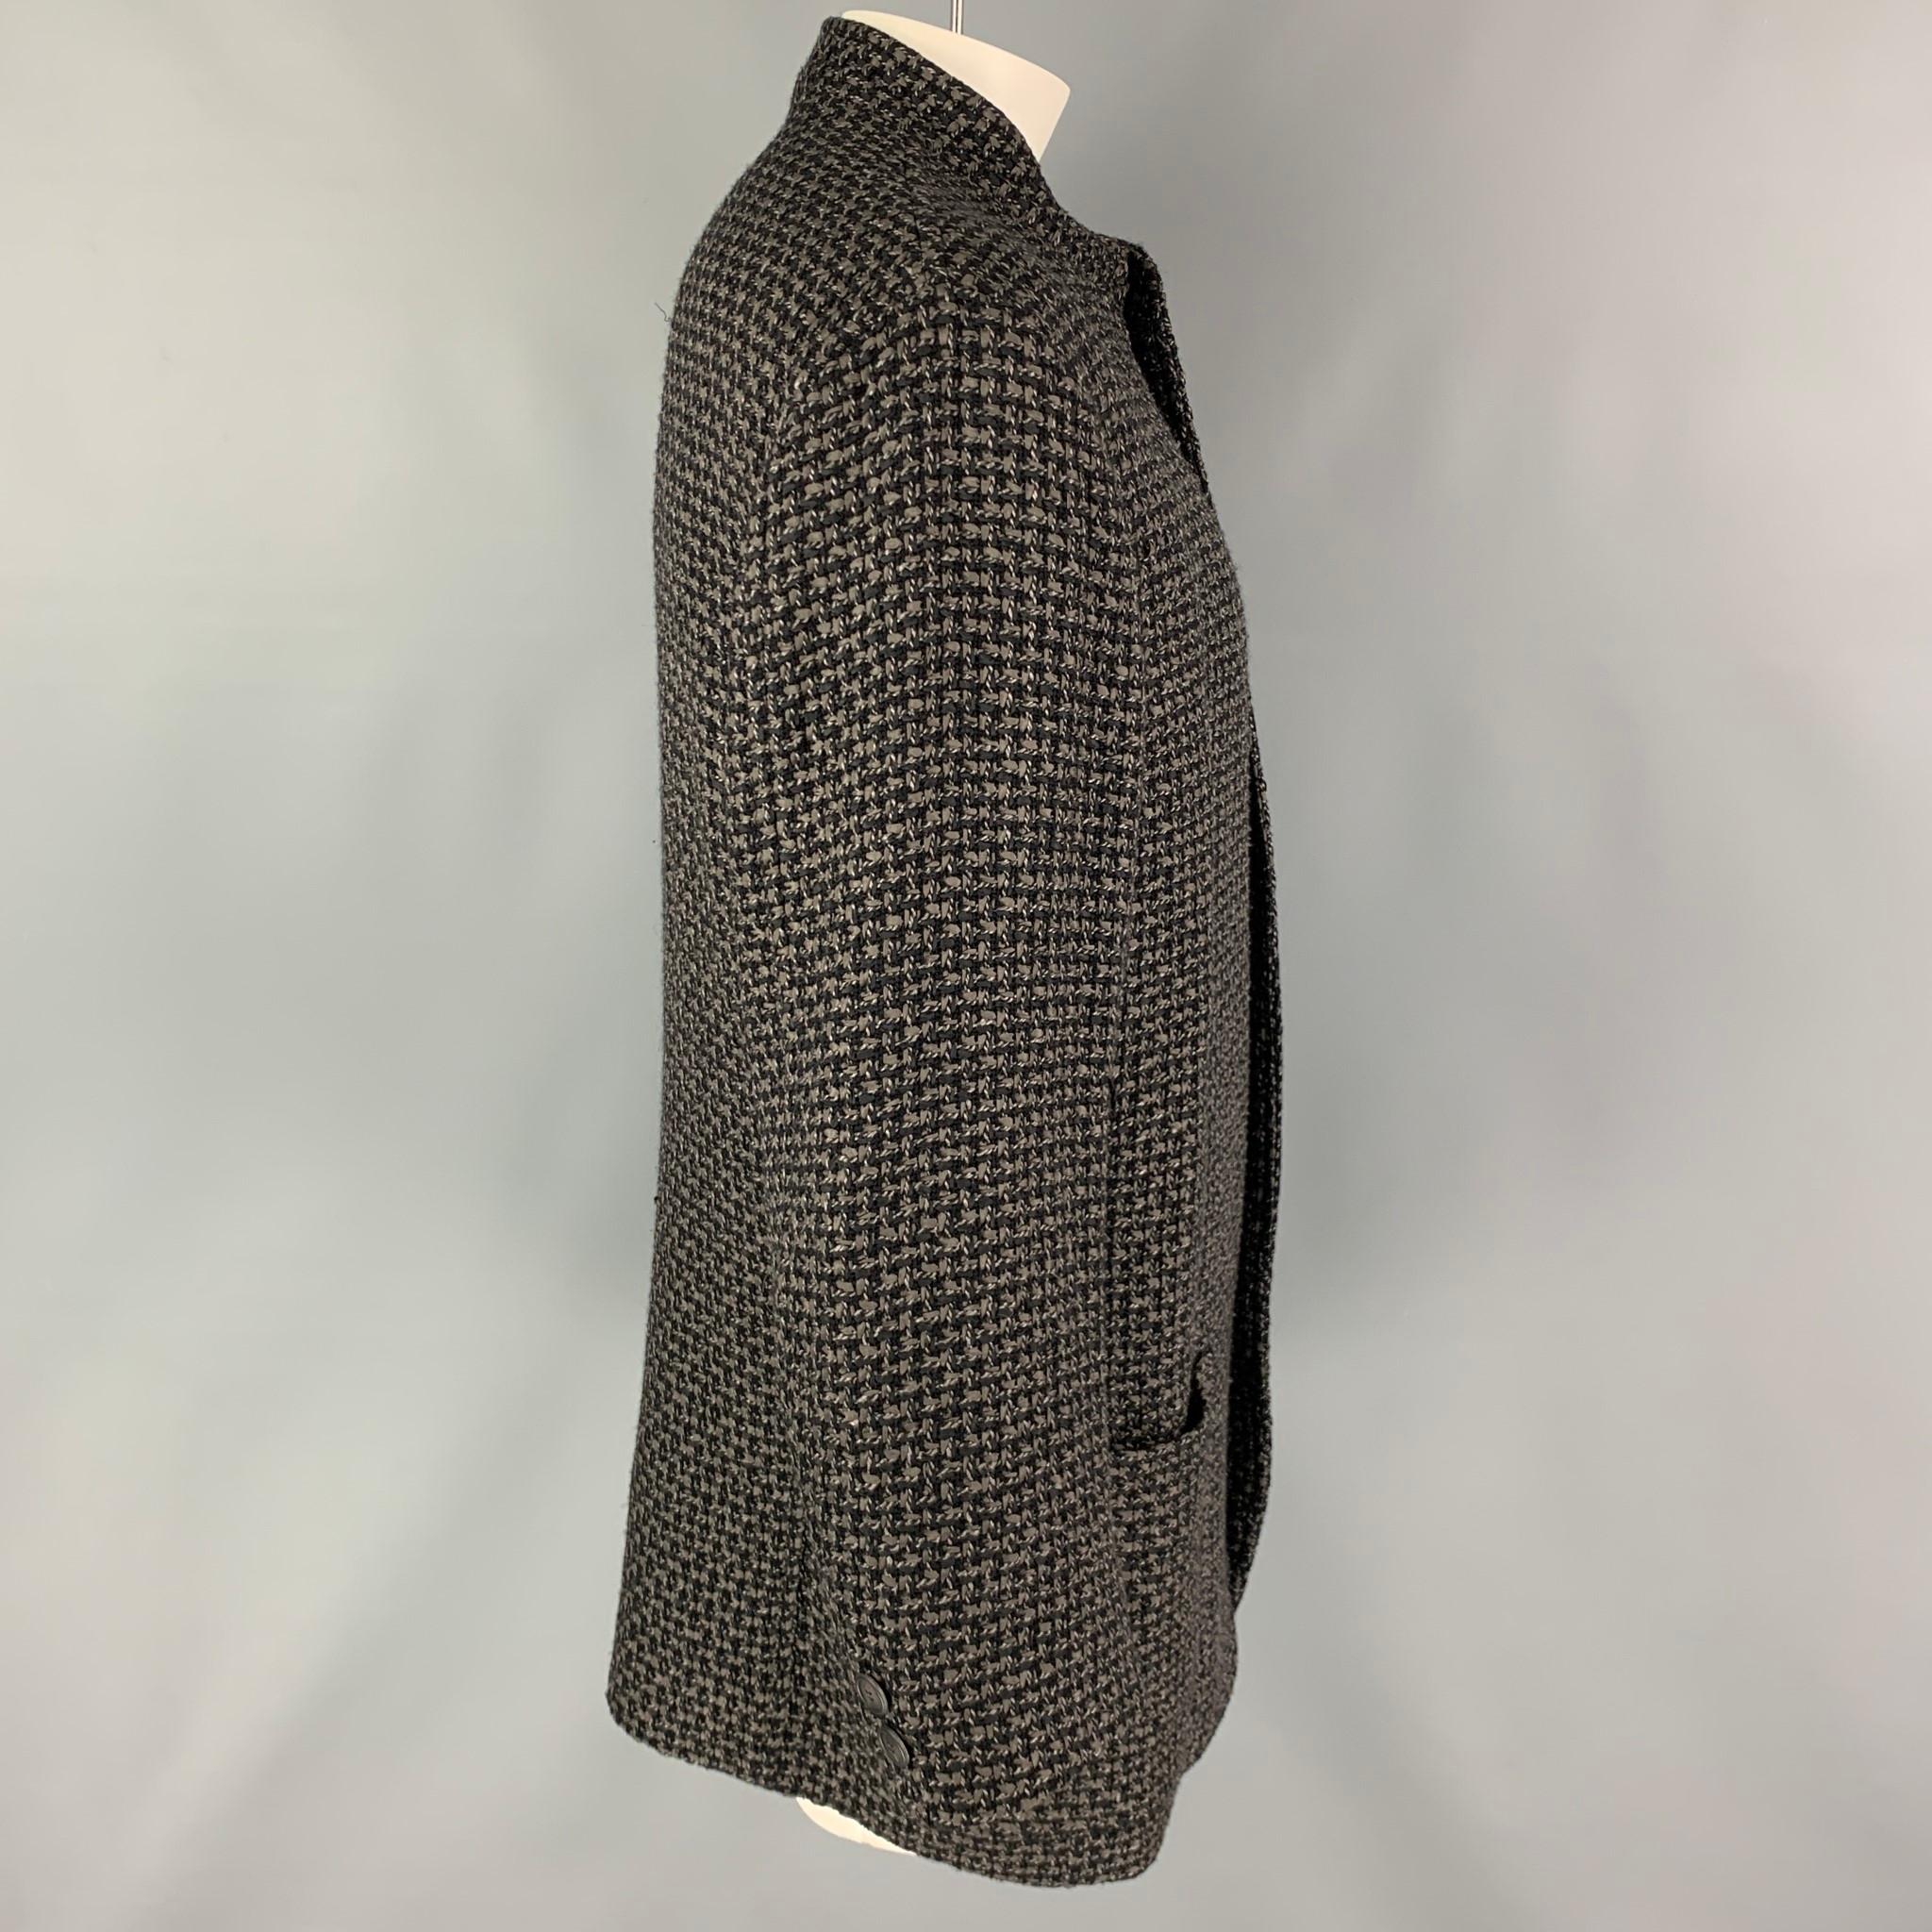 ISSEY MIYAKE MEN coat comes in a grey & black knitted wool blend featuring a collarless style, front pocket, and a buttoned closure. Made in Japan. 

Very Good Pre-Owned Condition.
Marked: XL

Measurements:

Shoulder: 20 in.
Chest: 42 in.
Sleeve: 24